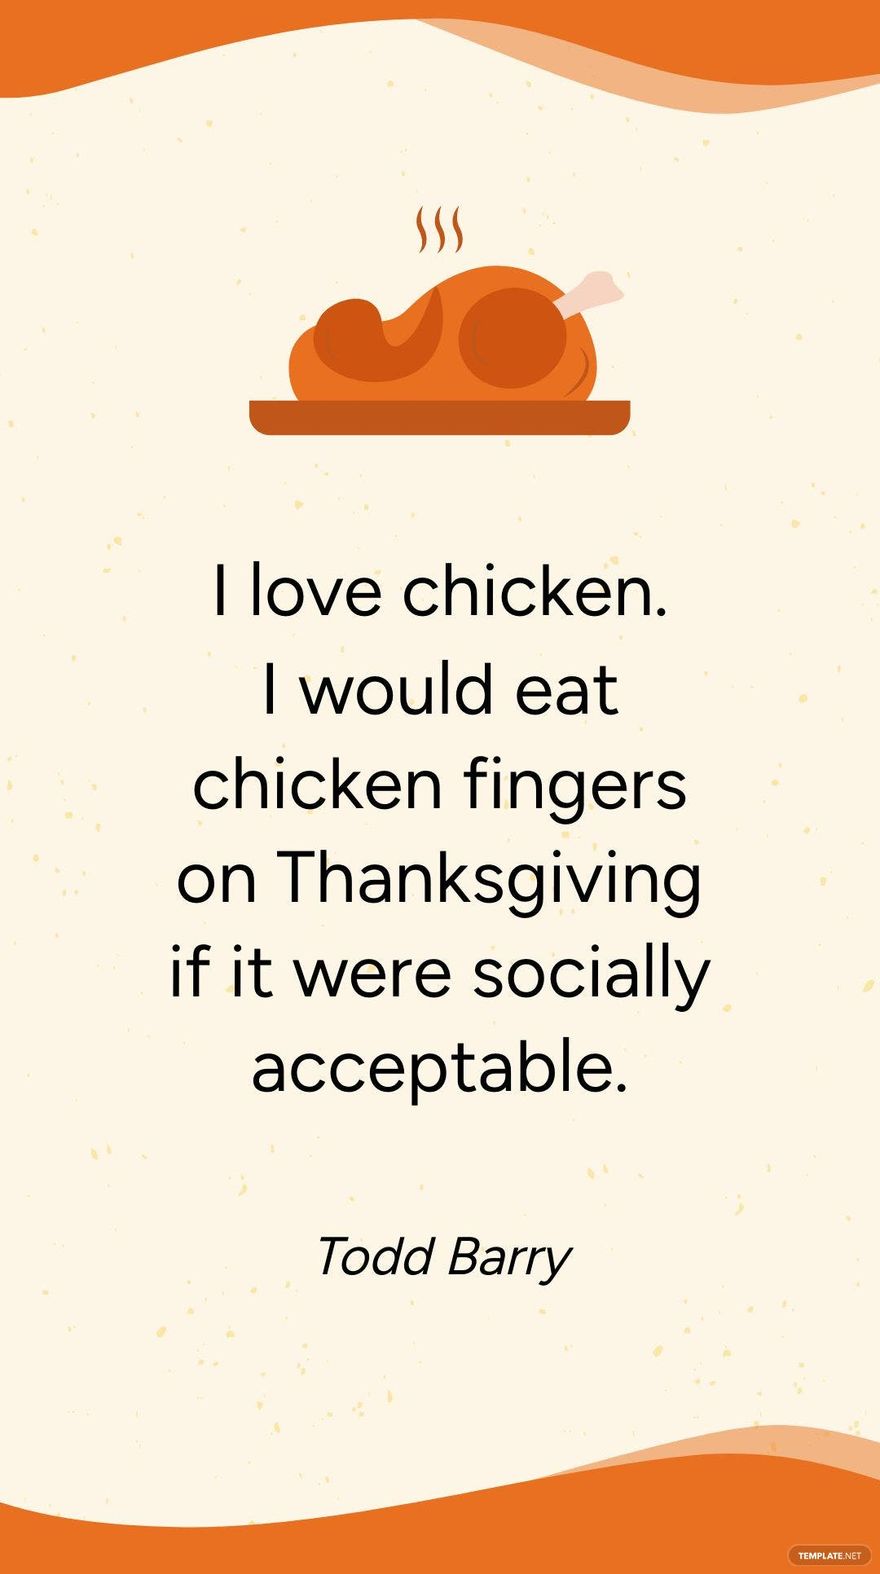 Todd Barry - I love chicken. I would eat chicken fingers on Thanksgiving if it were socially acceptable.